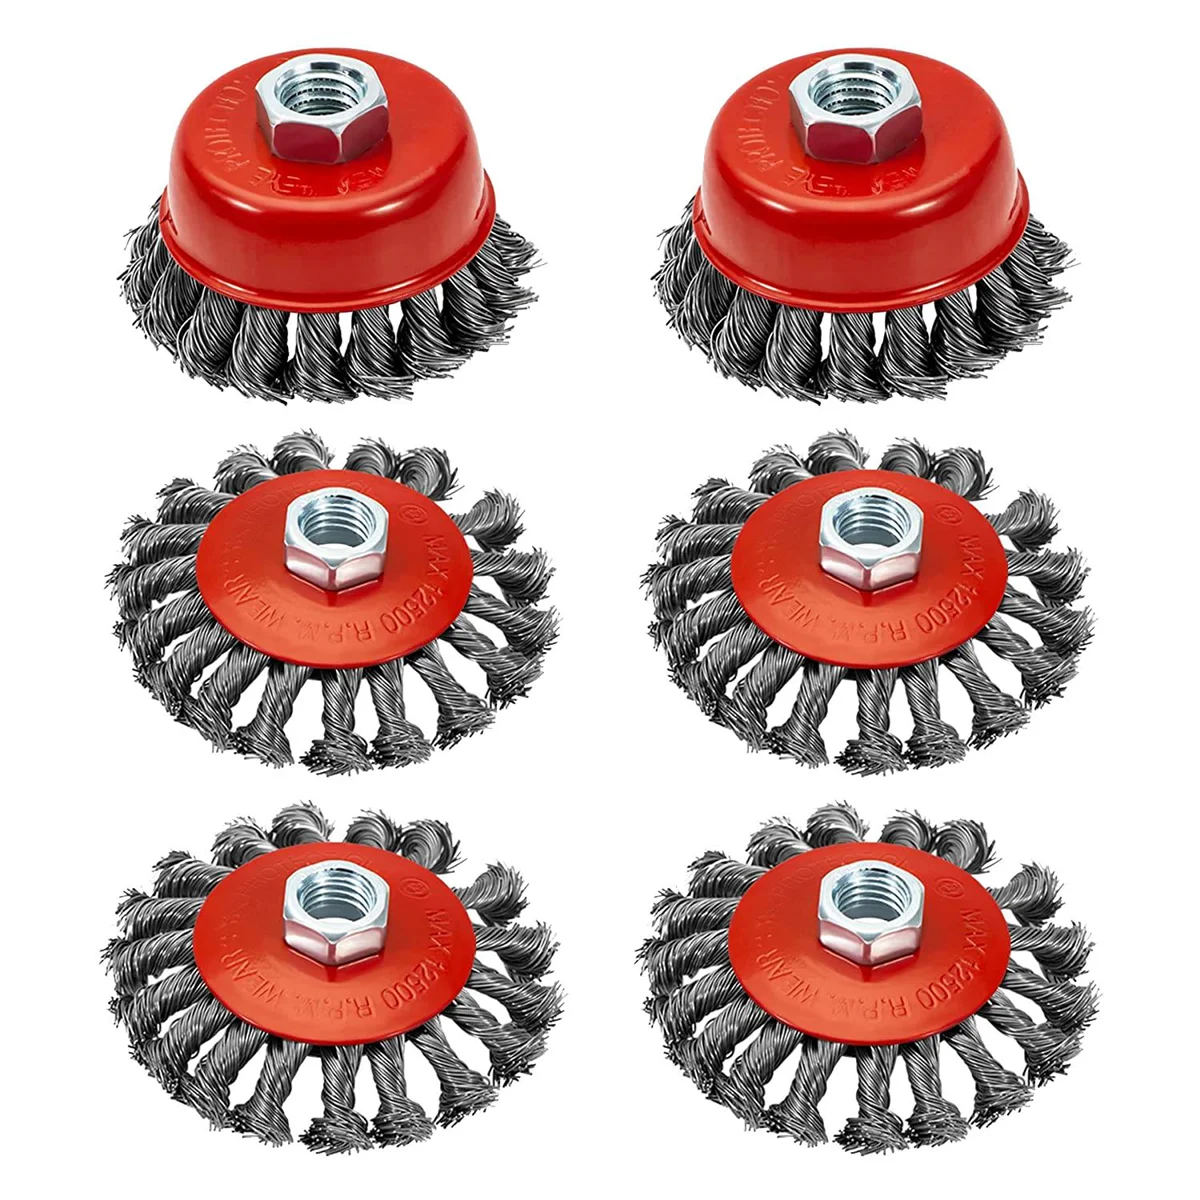 

6 Pack 4 Inch Wire Wheels for Angle Grinder, 3 Inch Wire Cup Brush for 4 1/2 Angle Grinder, for Removing Rust,Paint Etc